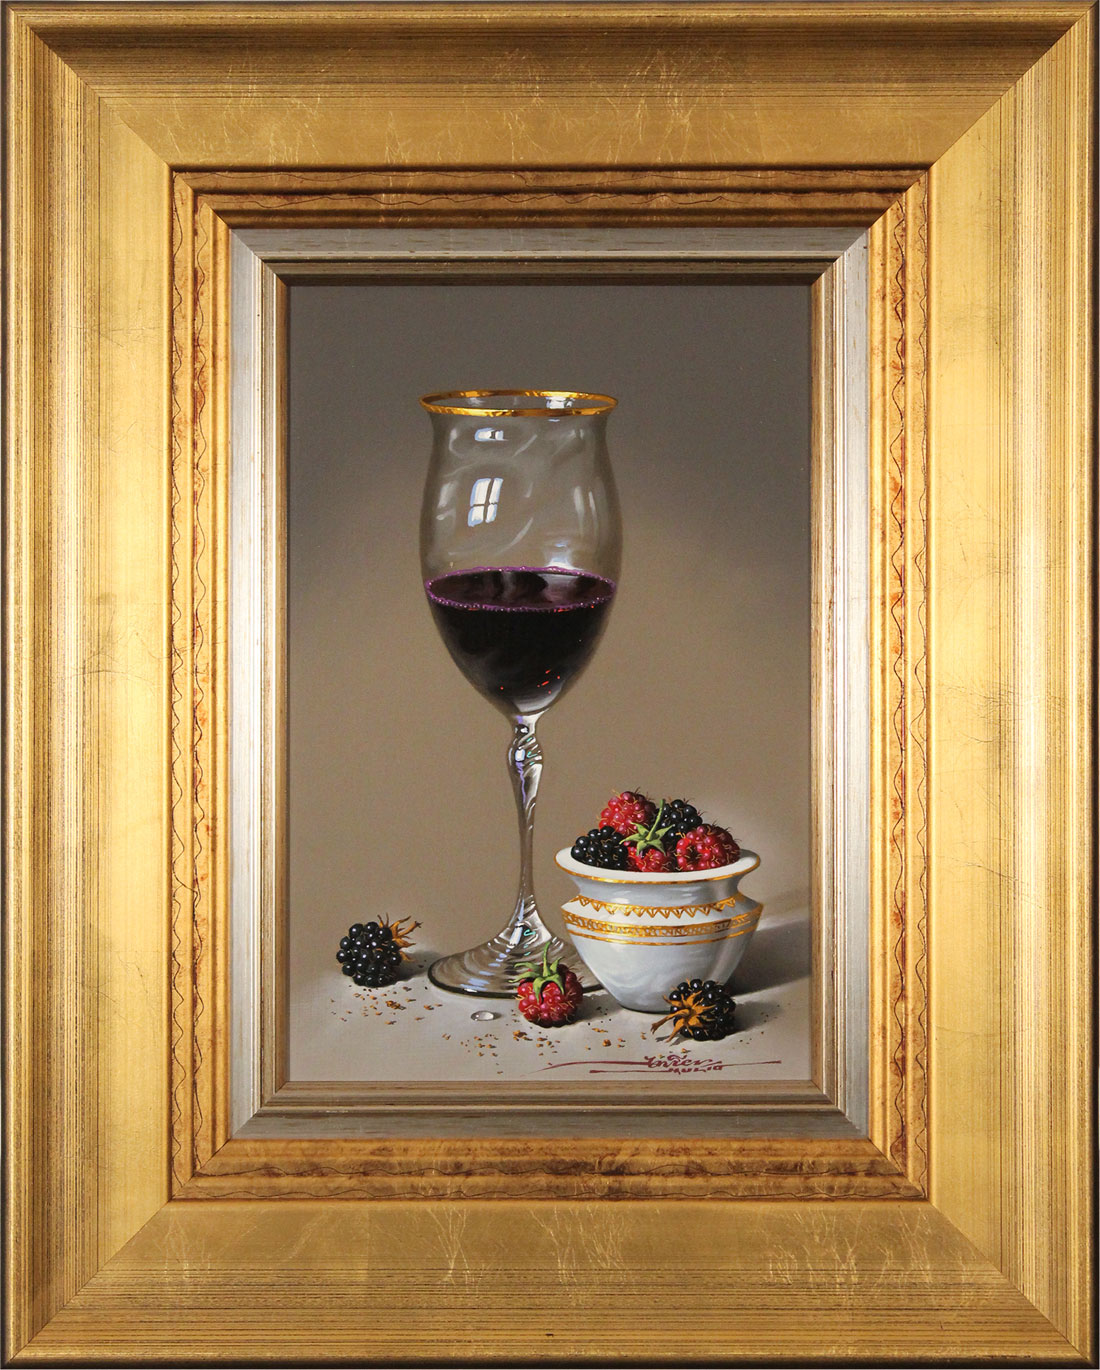 Javier Mulio, Original oil painting on panel, Red Wine and Ripened Fruits, click to enlarge